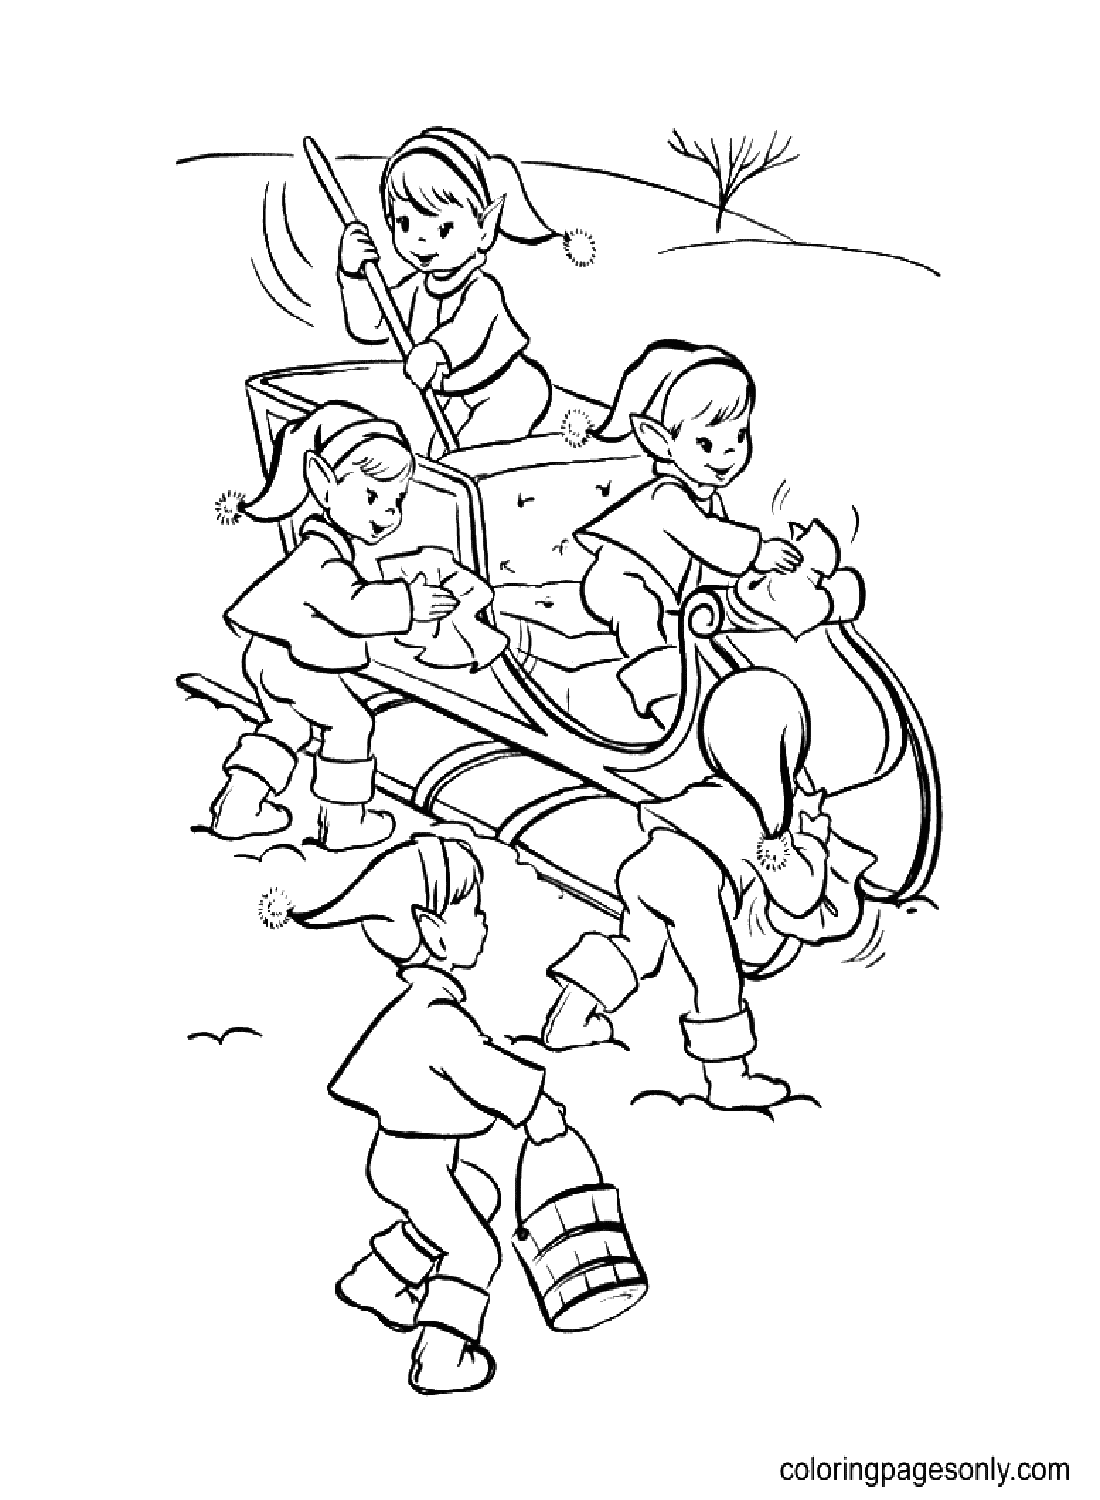 The Elves Clear The Carriage For Santa Claus Coloring Pages